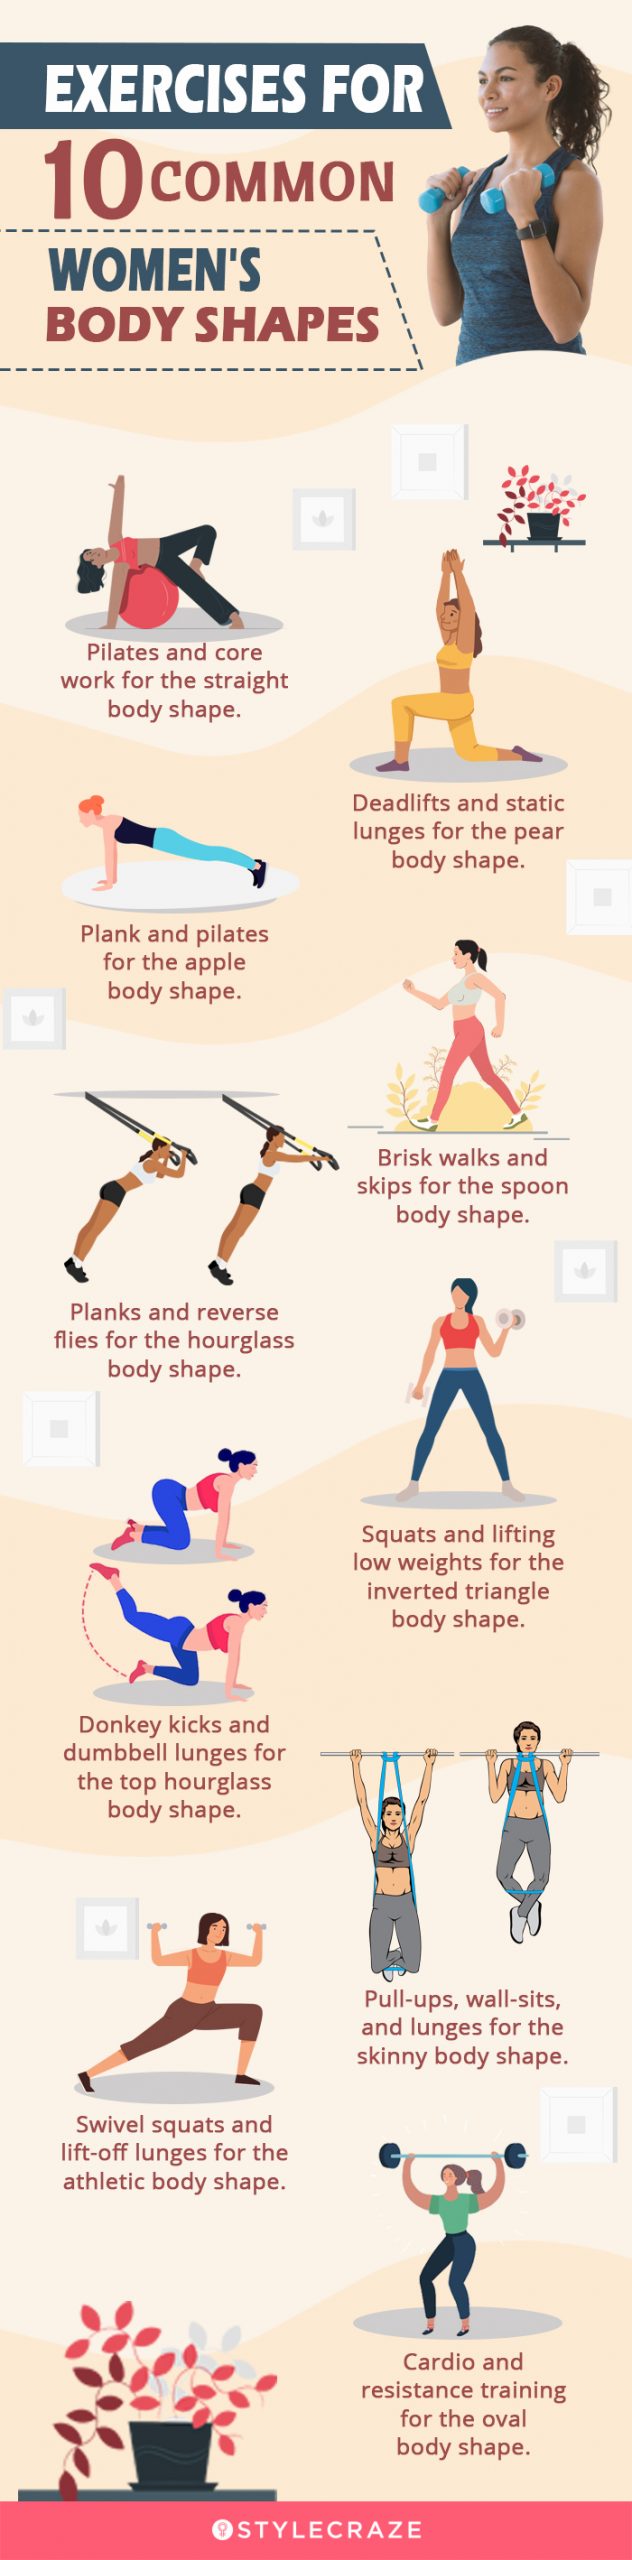 exercises for 10 common women's body shapes [infographic]